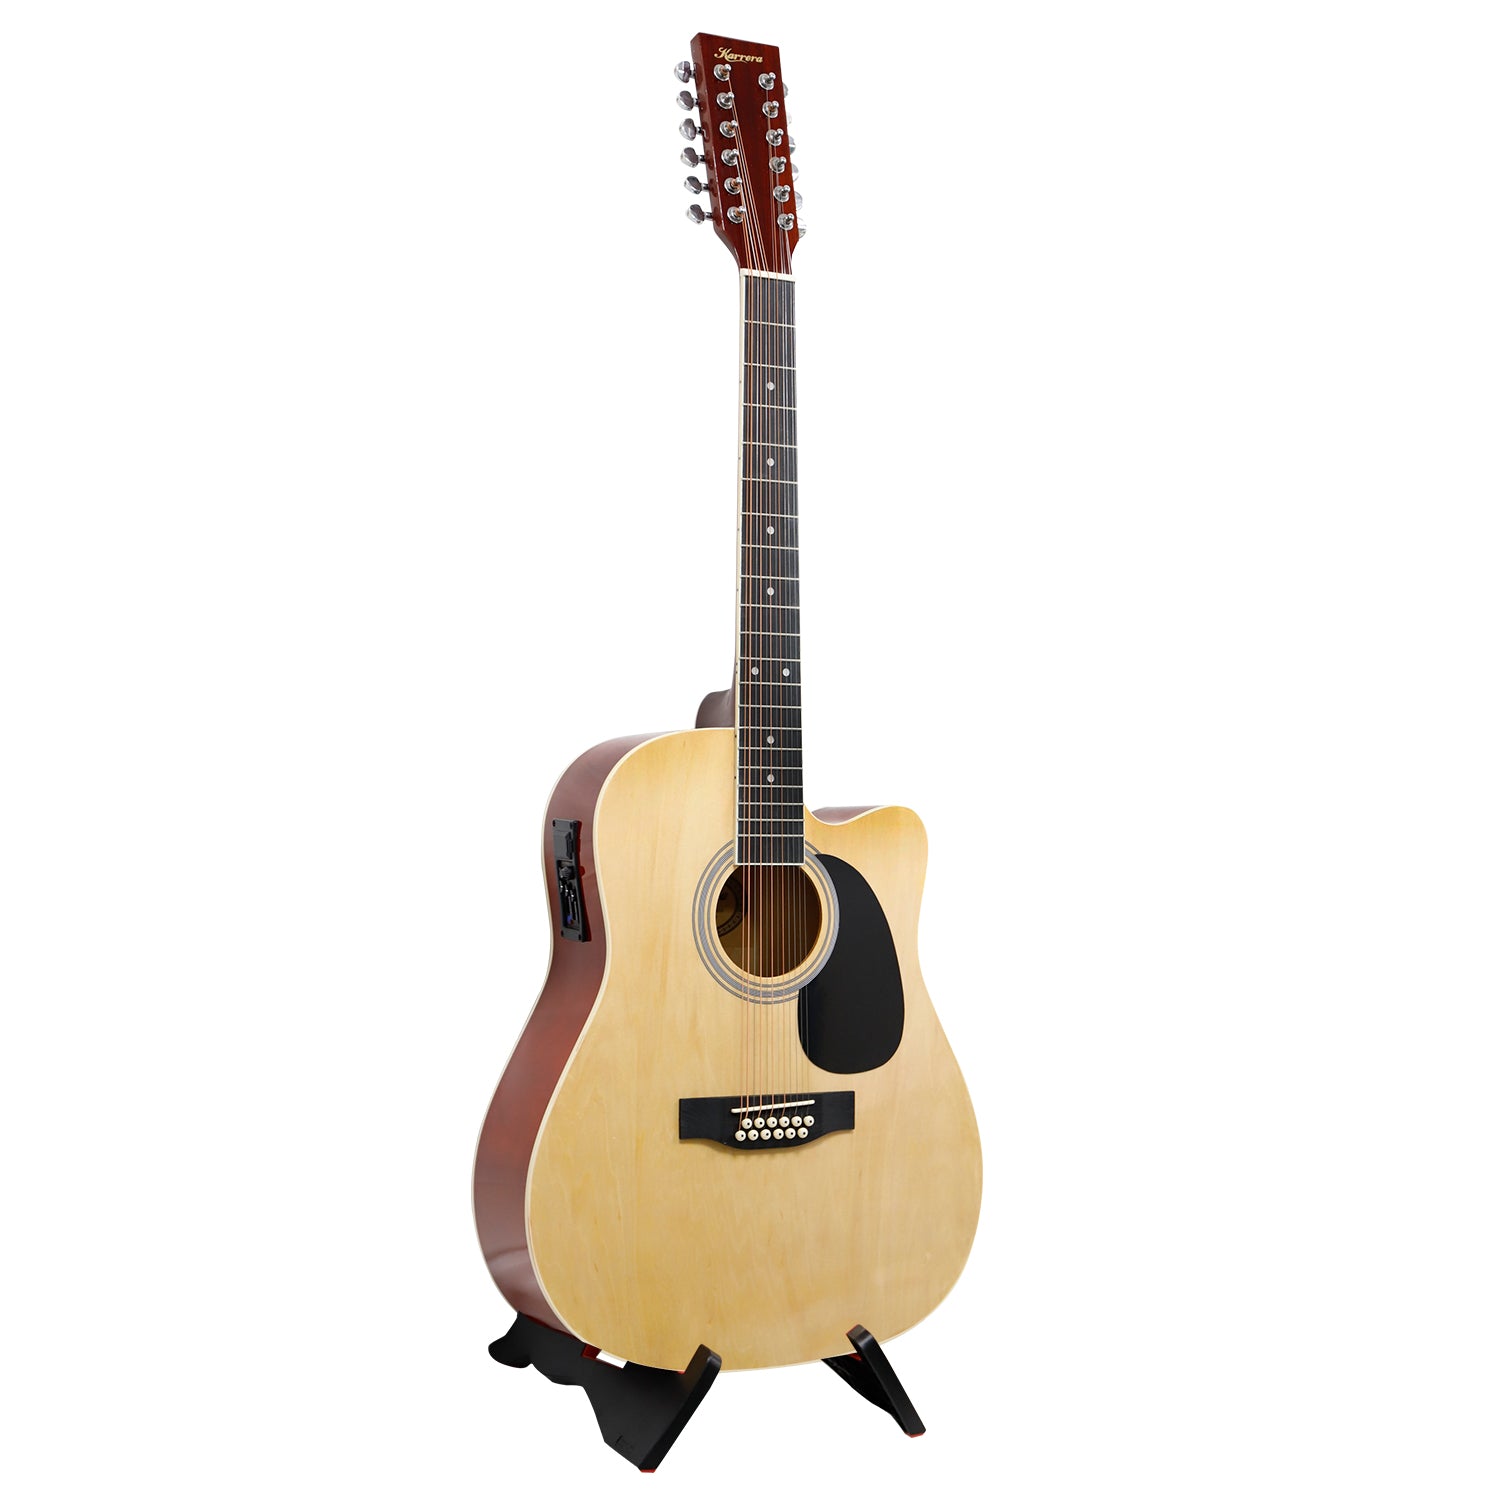 Karrera 12-String Acoustic Guitar with EQ - Natural - SILBERSHELL